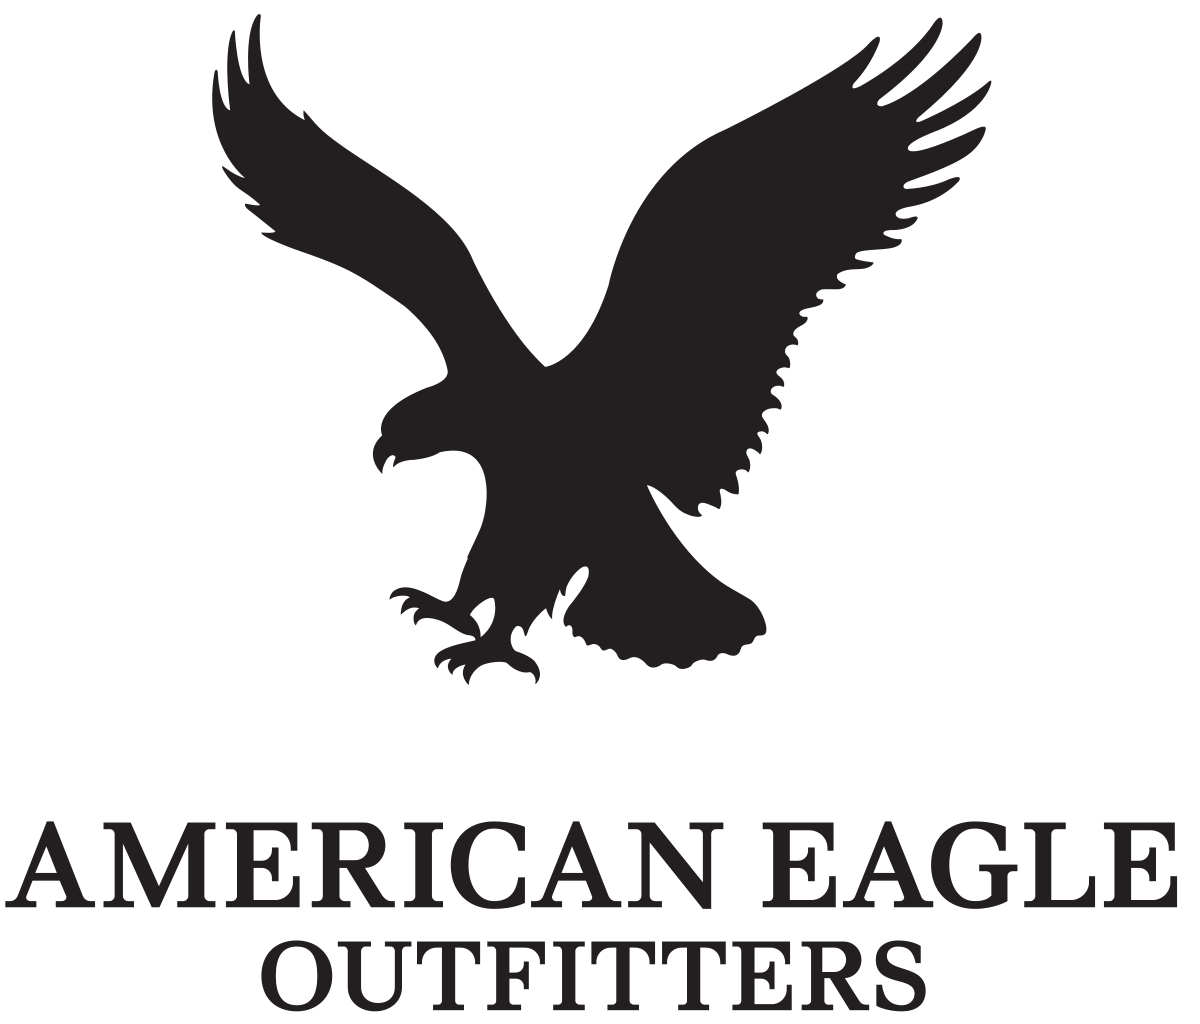 Eagle Brand Logo - Image - 1200px-American Eagle Outfitters logo.svg.png | Logopedia ...